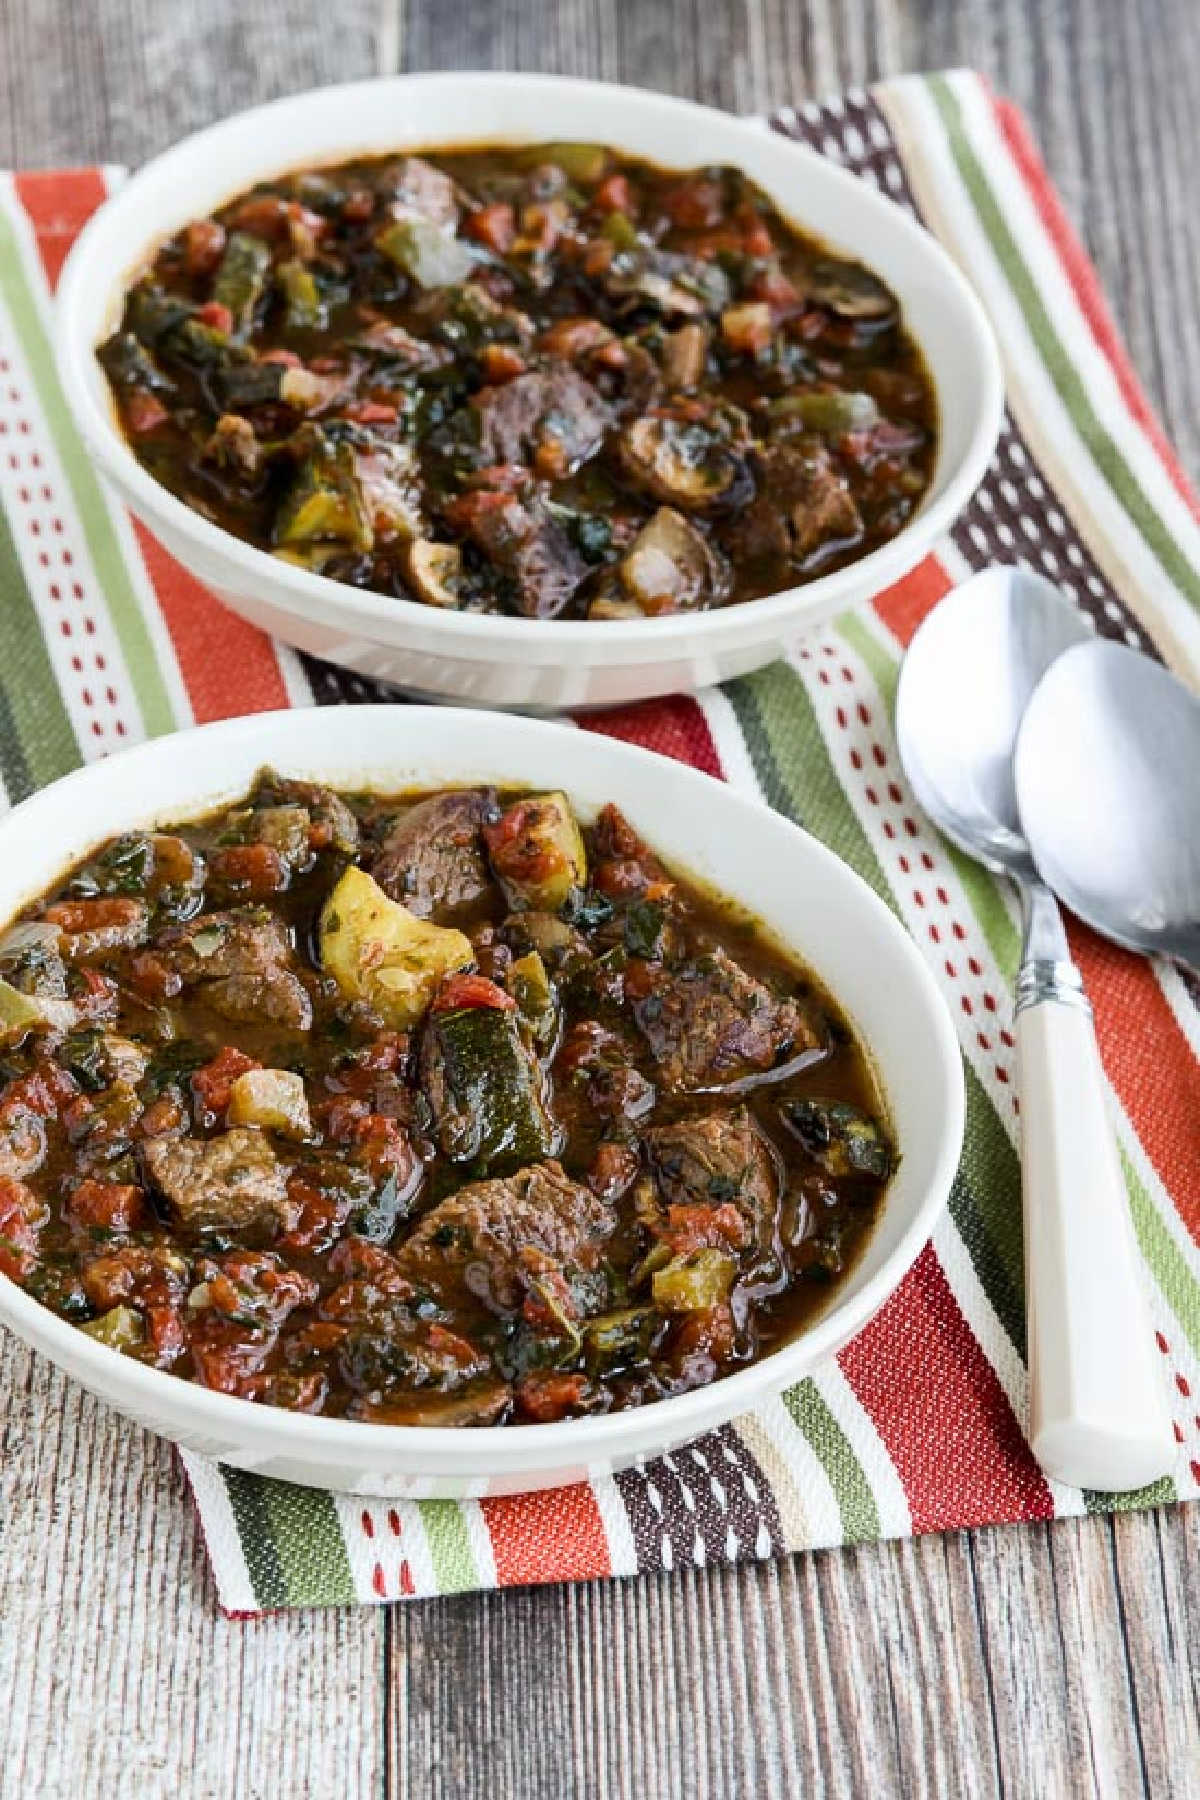 Italian Beef Stew with Zucchini, Mushrooms, and Basil shown in two serving bowls with spoons